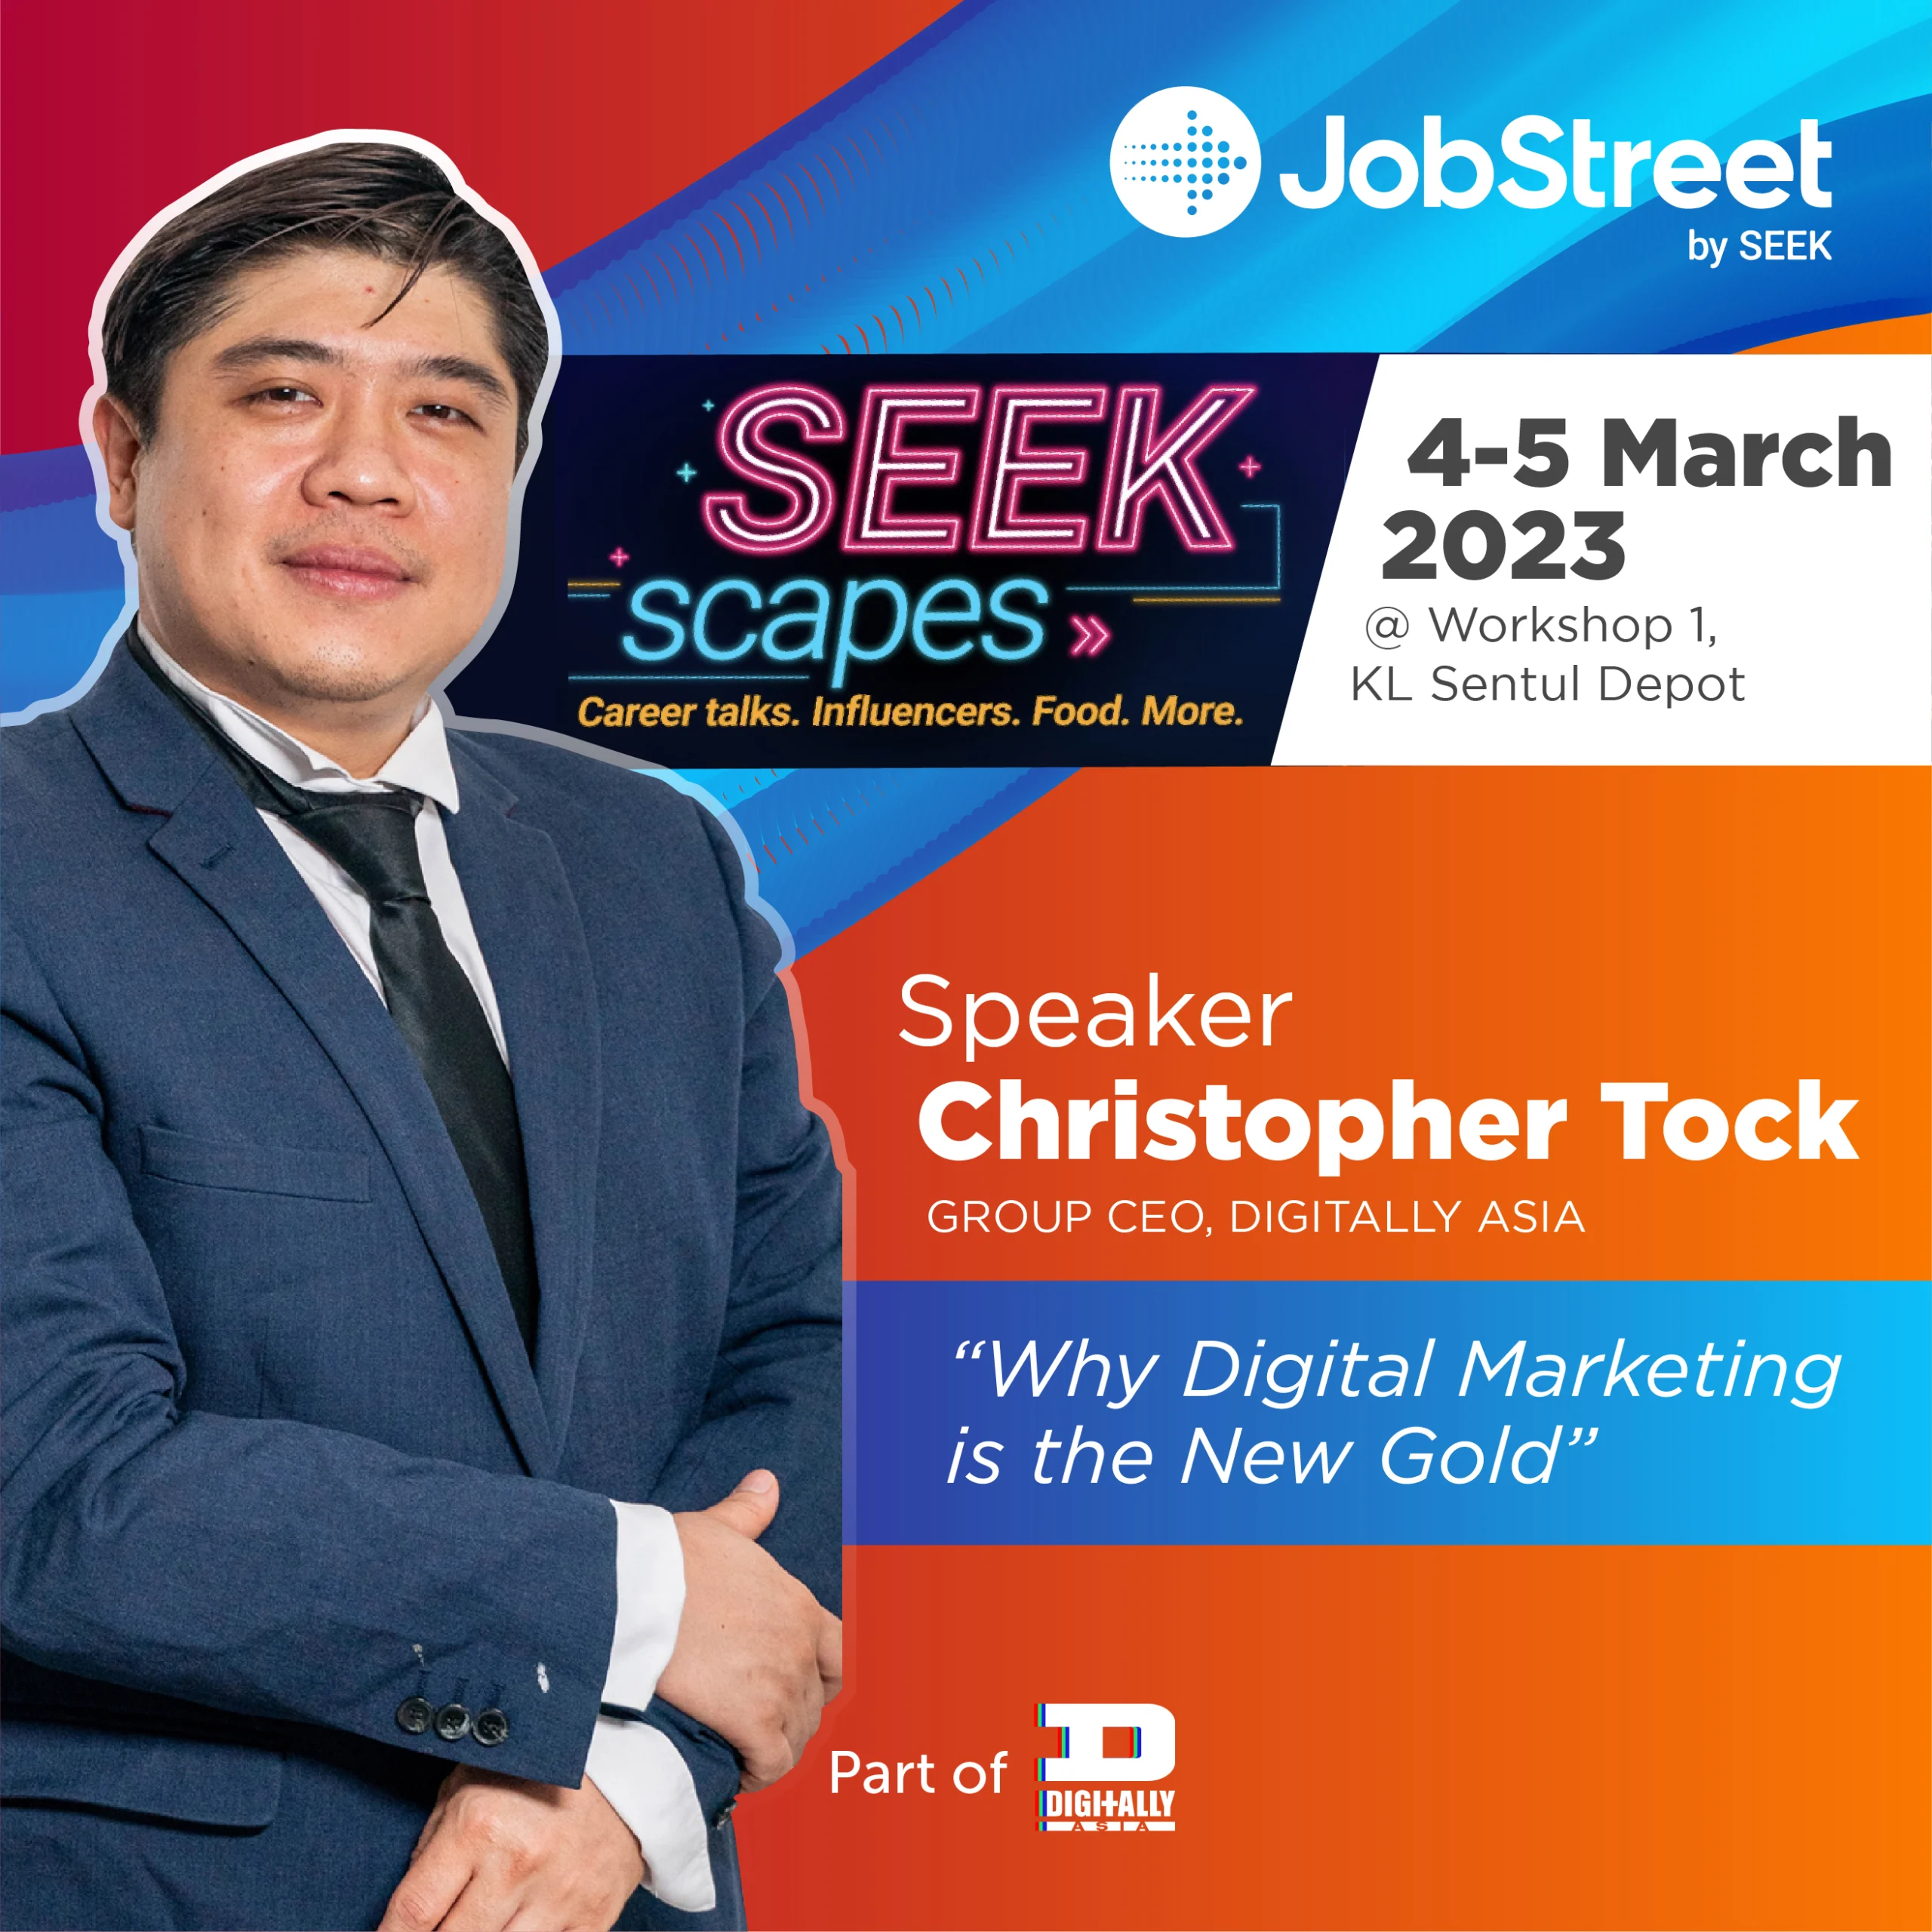 Christopher Tock, the CEO of Digitally.Asia will be a speaker on March 4 and 5 at the new must-attend JobStreet event, SEEK scapes!